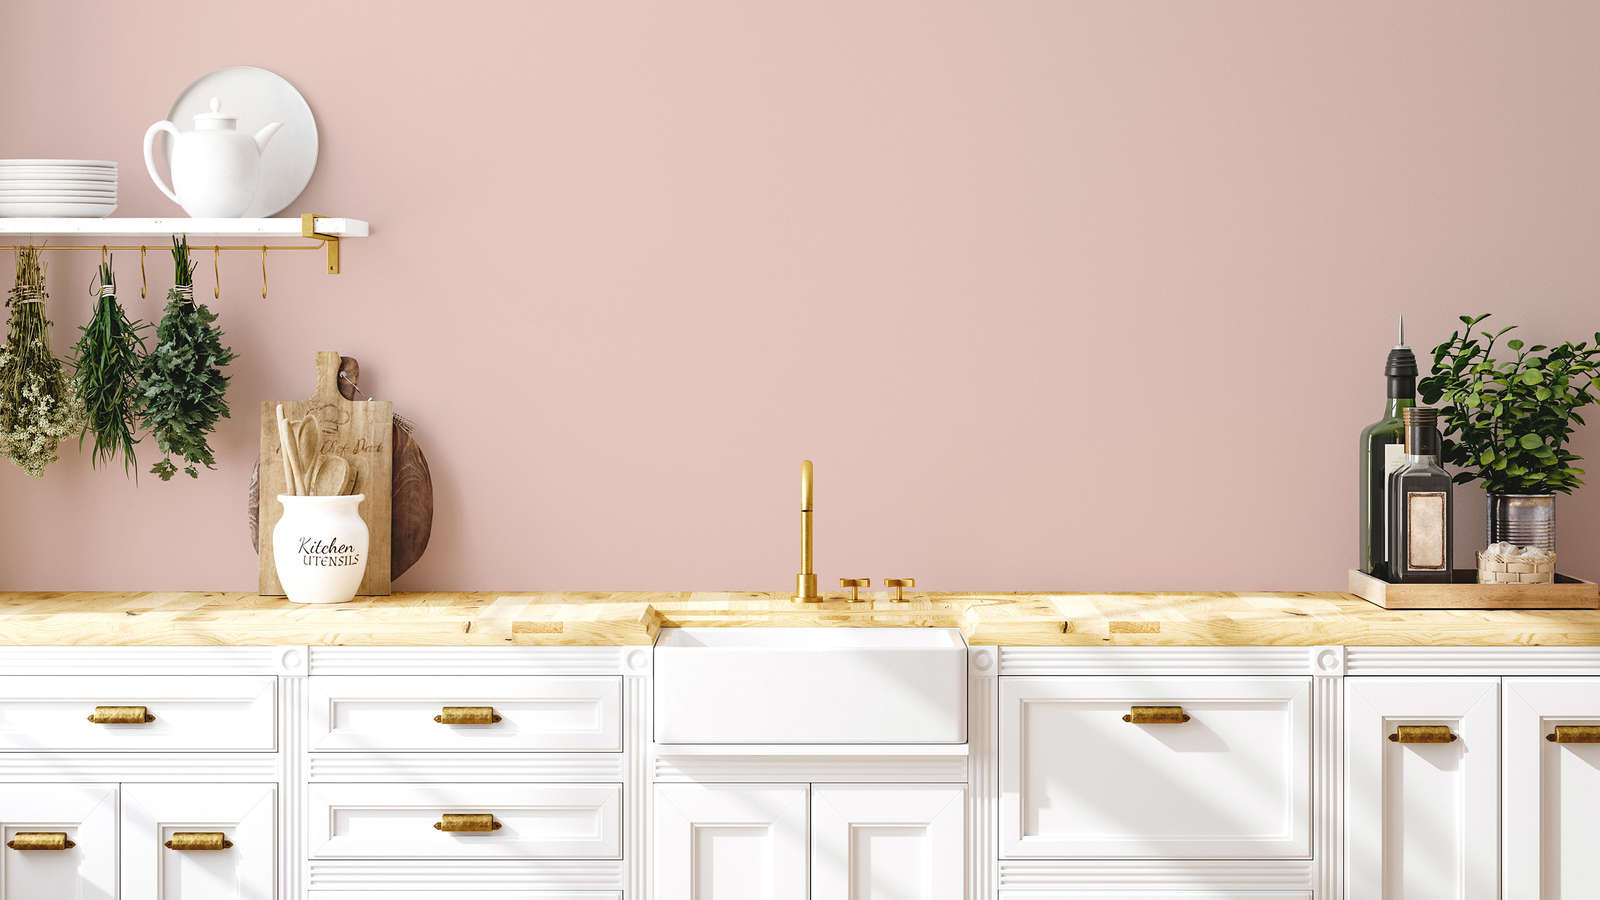             Premium Wall Paint Homely Old Pink »Luxury Lipstick« NW1001 – 1 litre
        